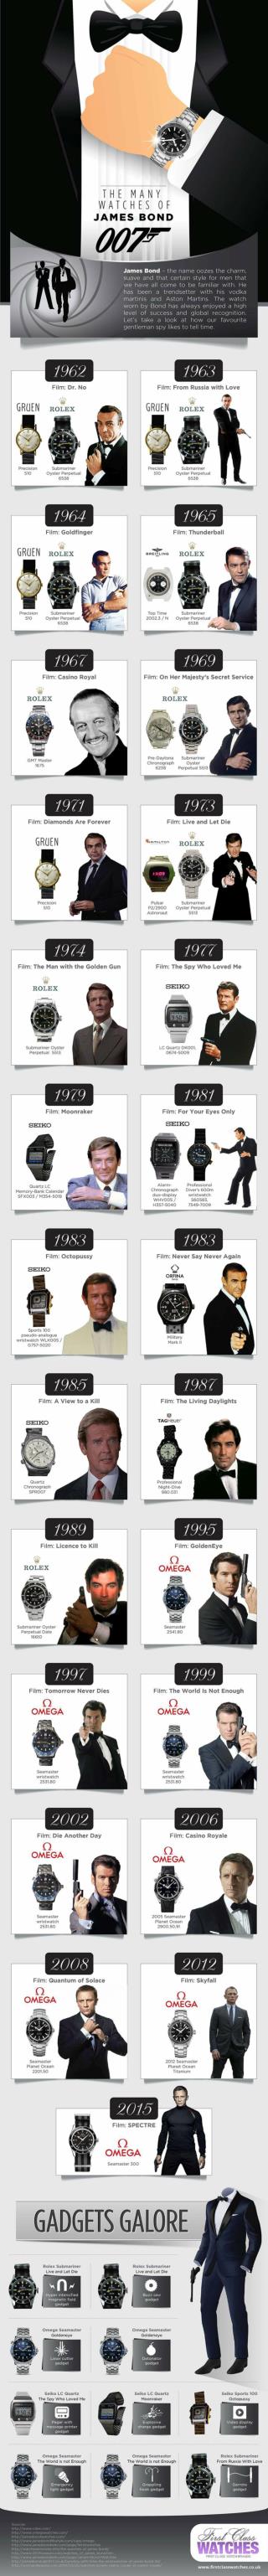 The Many Watches of James Bond